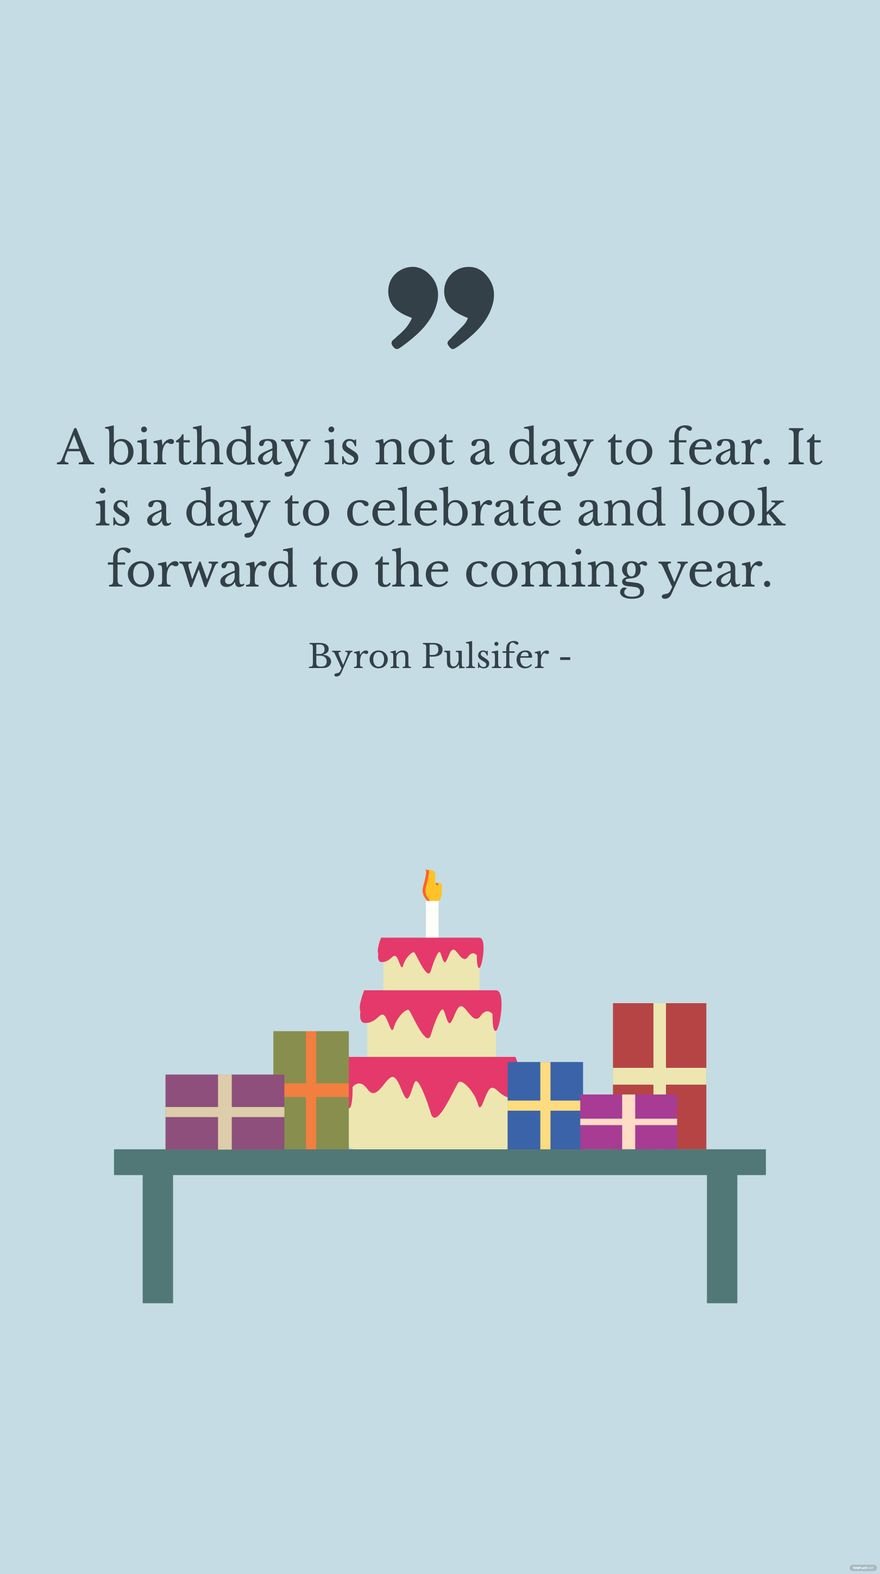 Free Byron Pulsifer - A birthday is not a day to fear. It is a day to celebrate and look forward to the coming year. in JPG